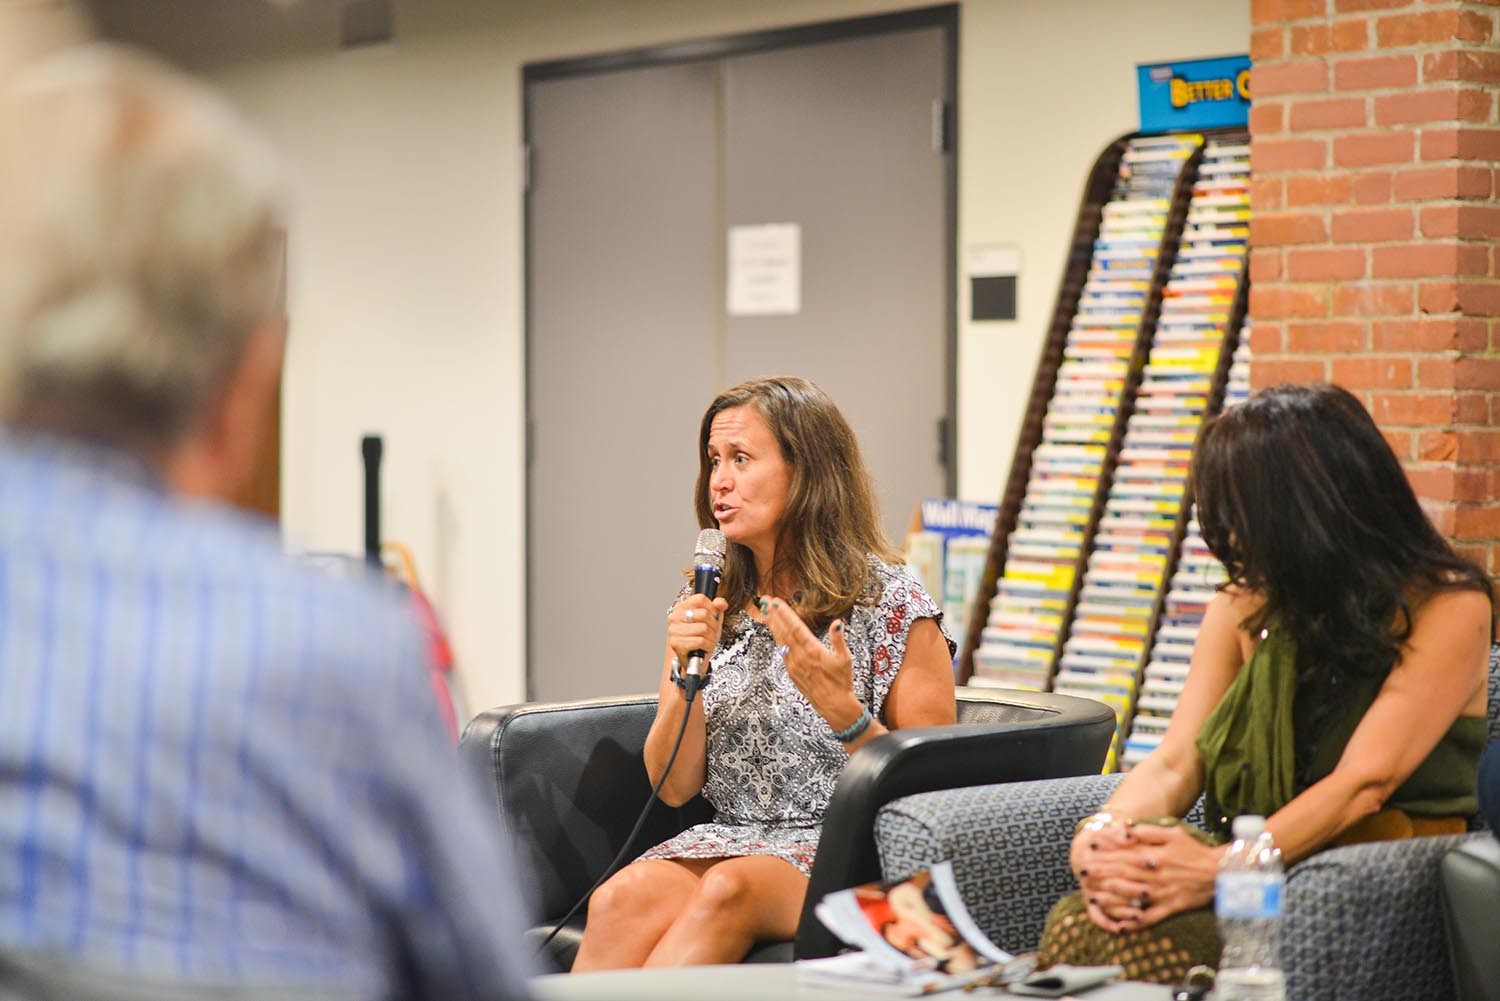 On. Sept. 16, University Chaplain Tracy Mehr-Muska spoke about her new book, Weathering the Storm, during a Local Author Program on Mind, Body, Spirit at the Wesleyan RJ Julia Bookstore.